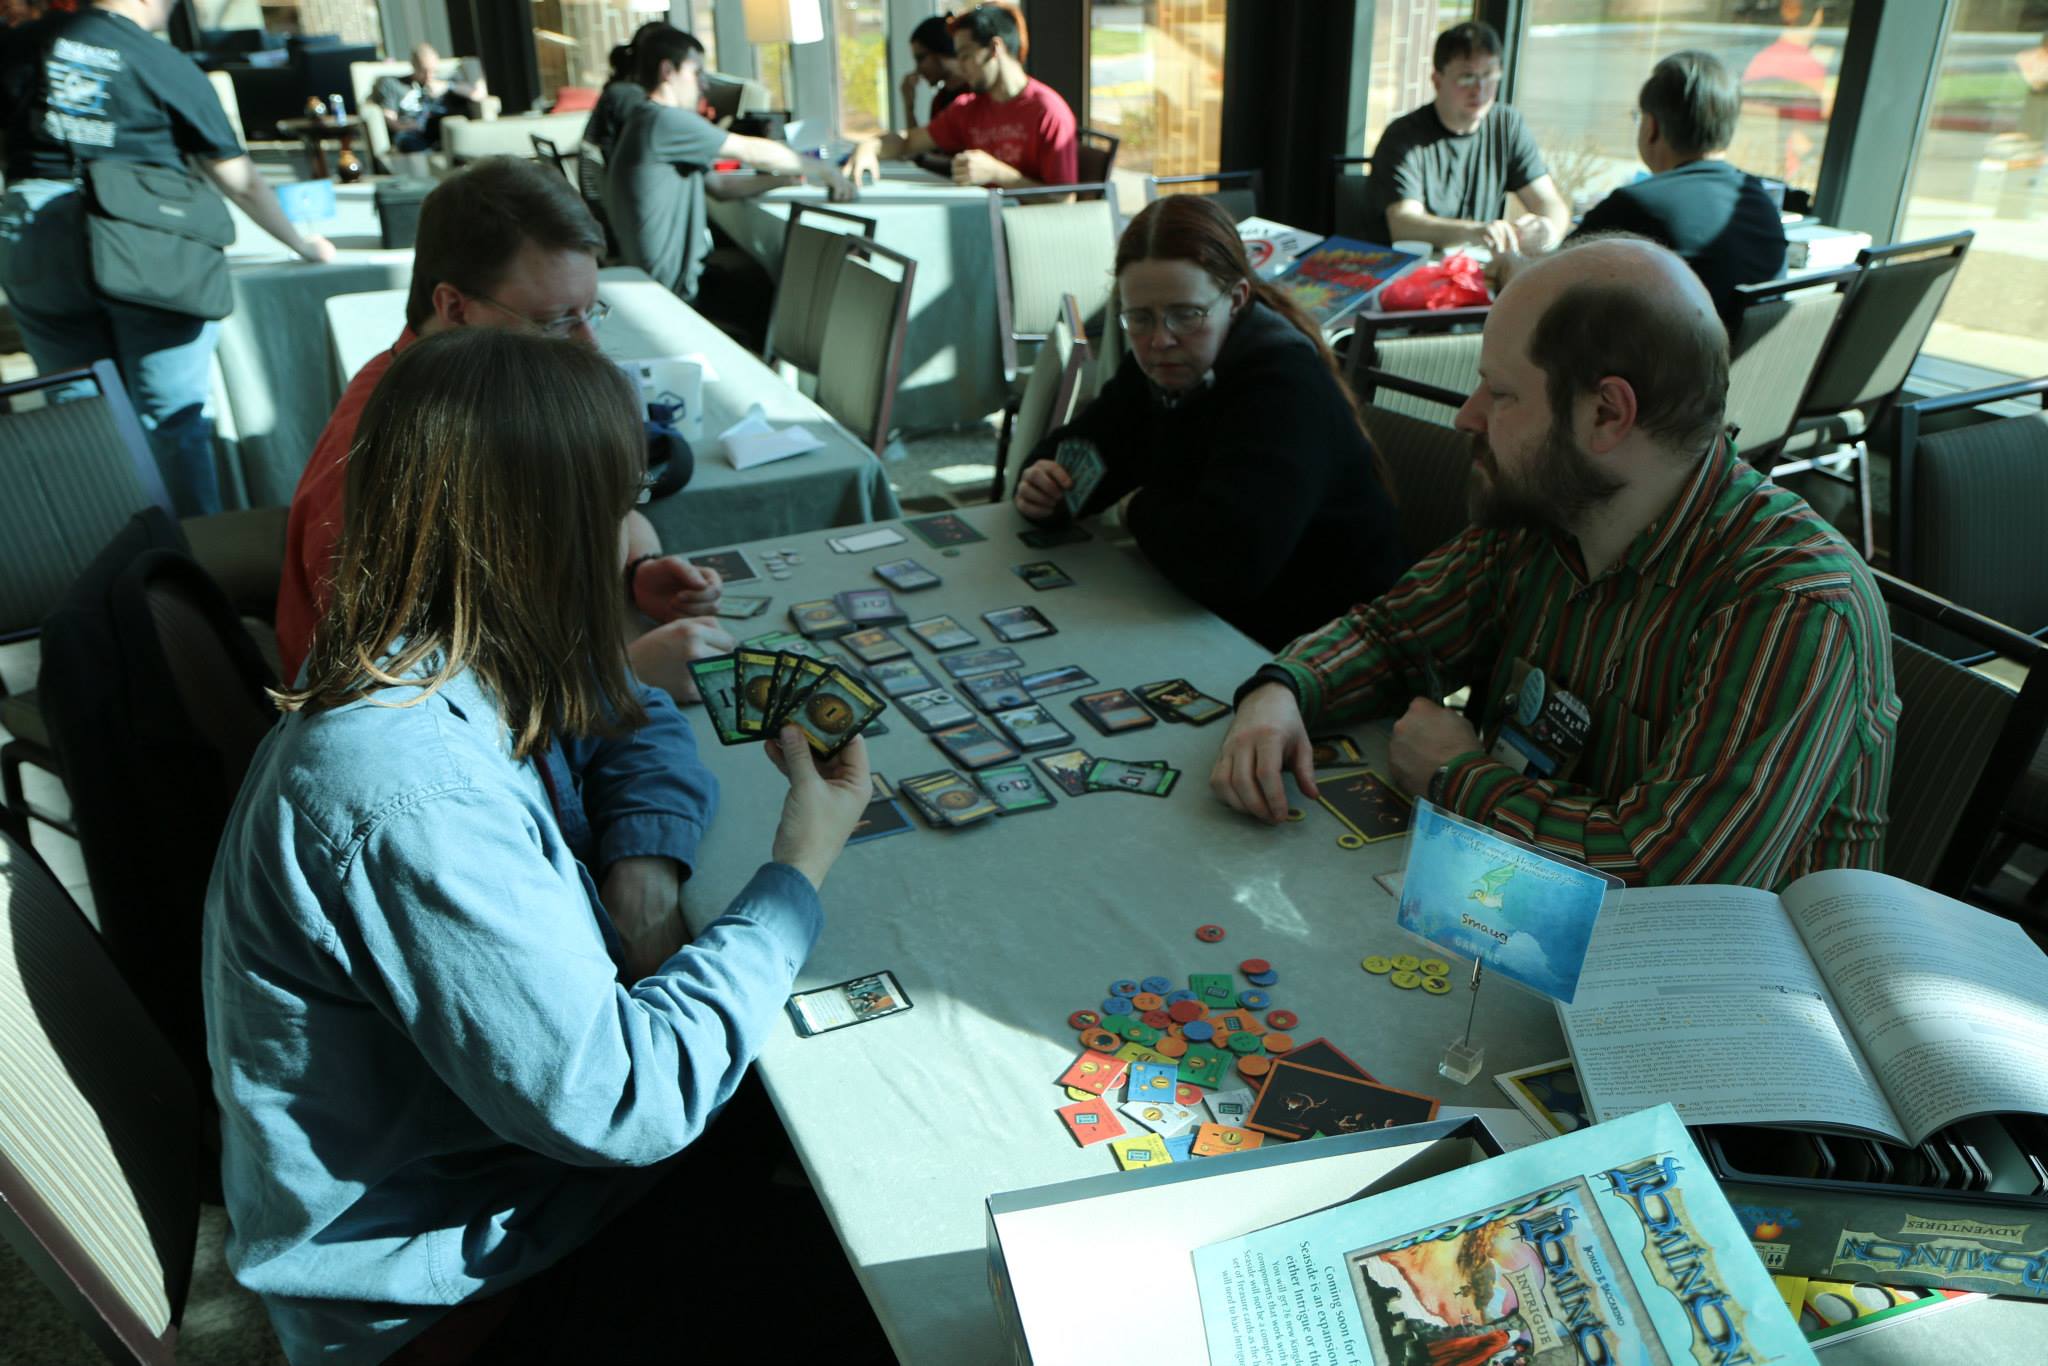 Group playing the deck building game Dominion with other groups in the background playing games